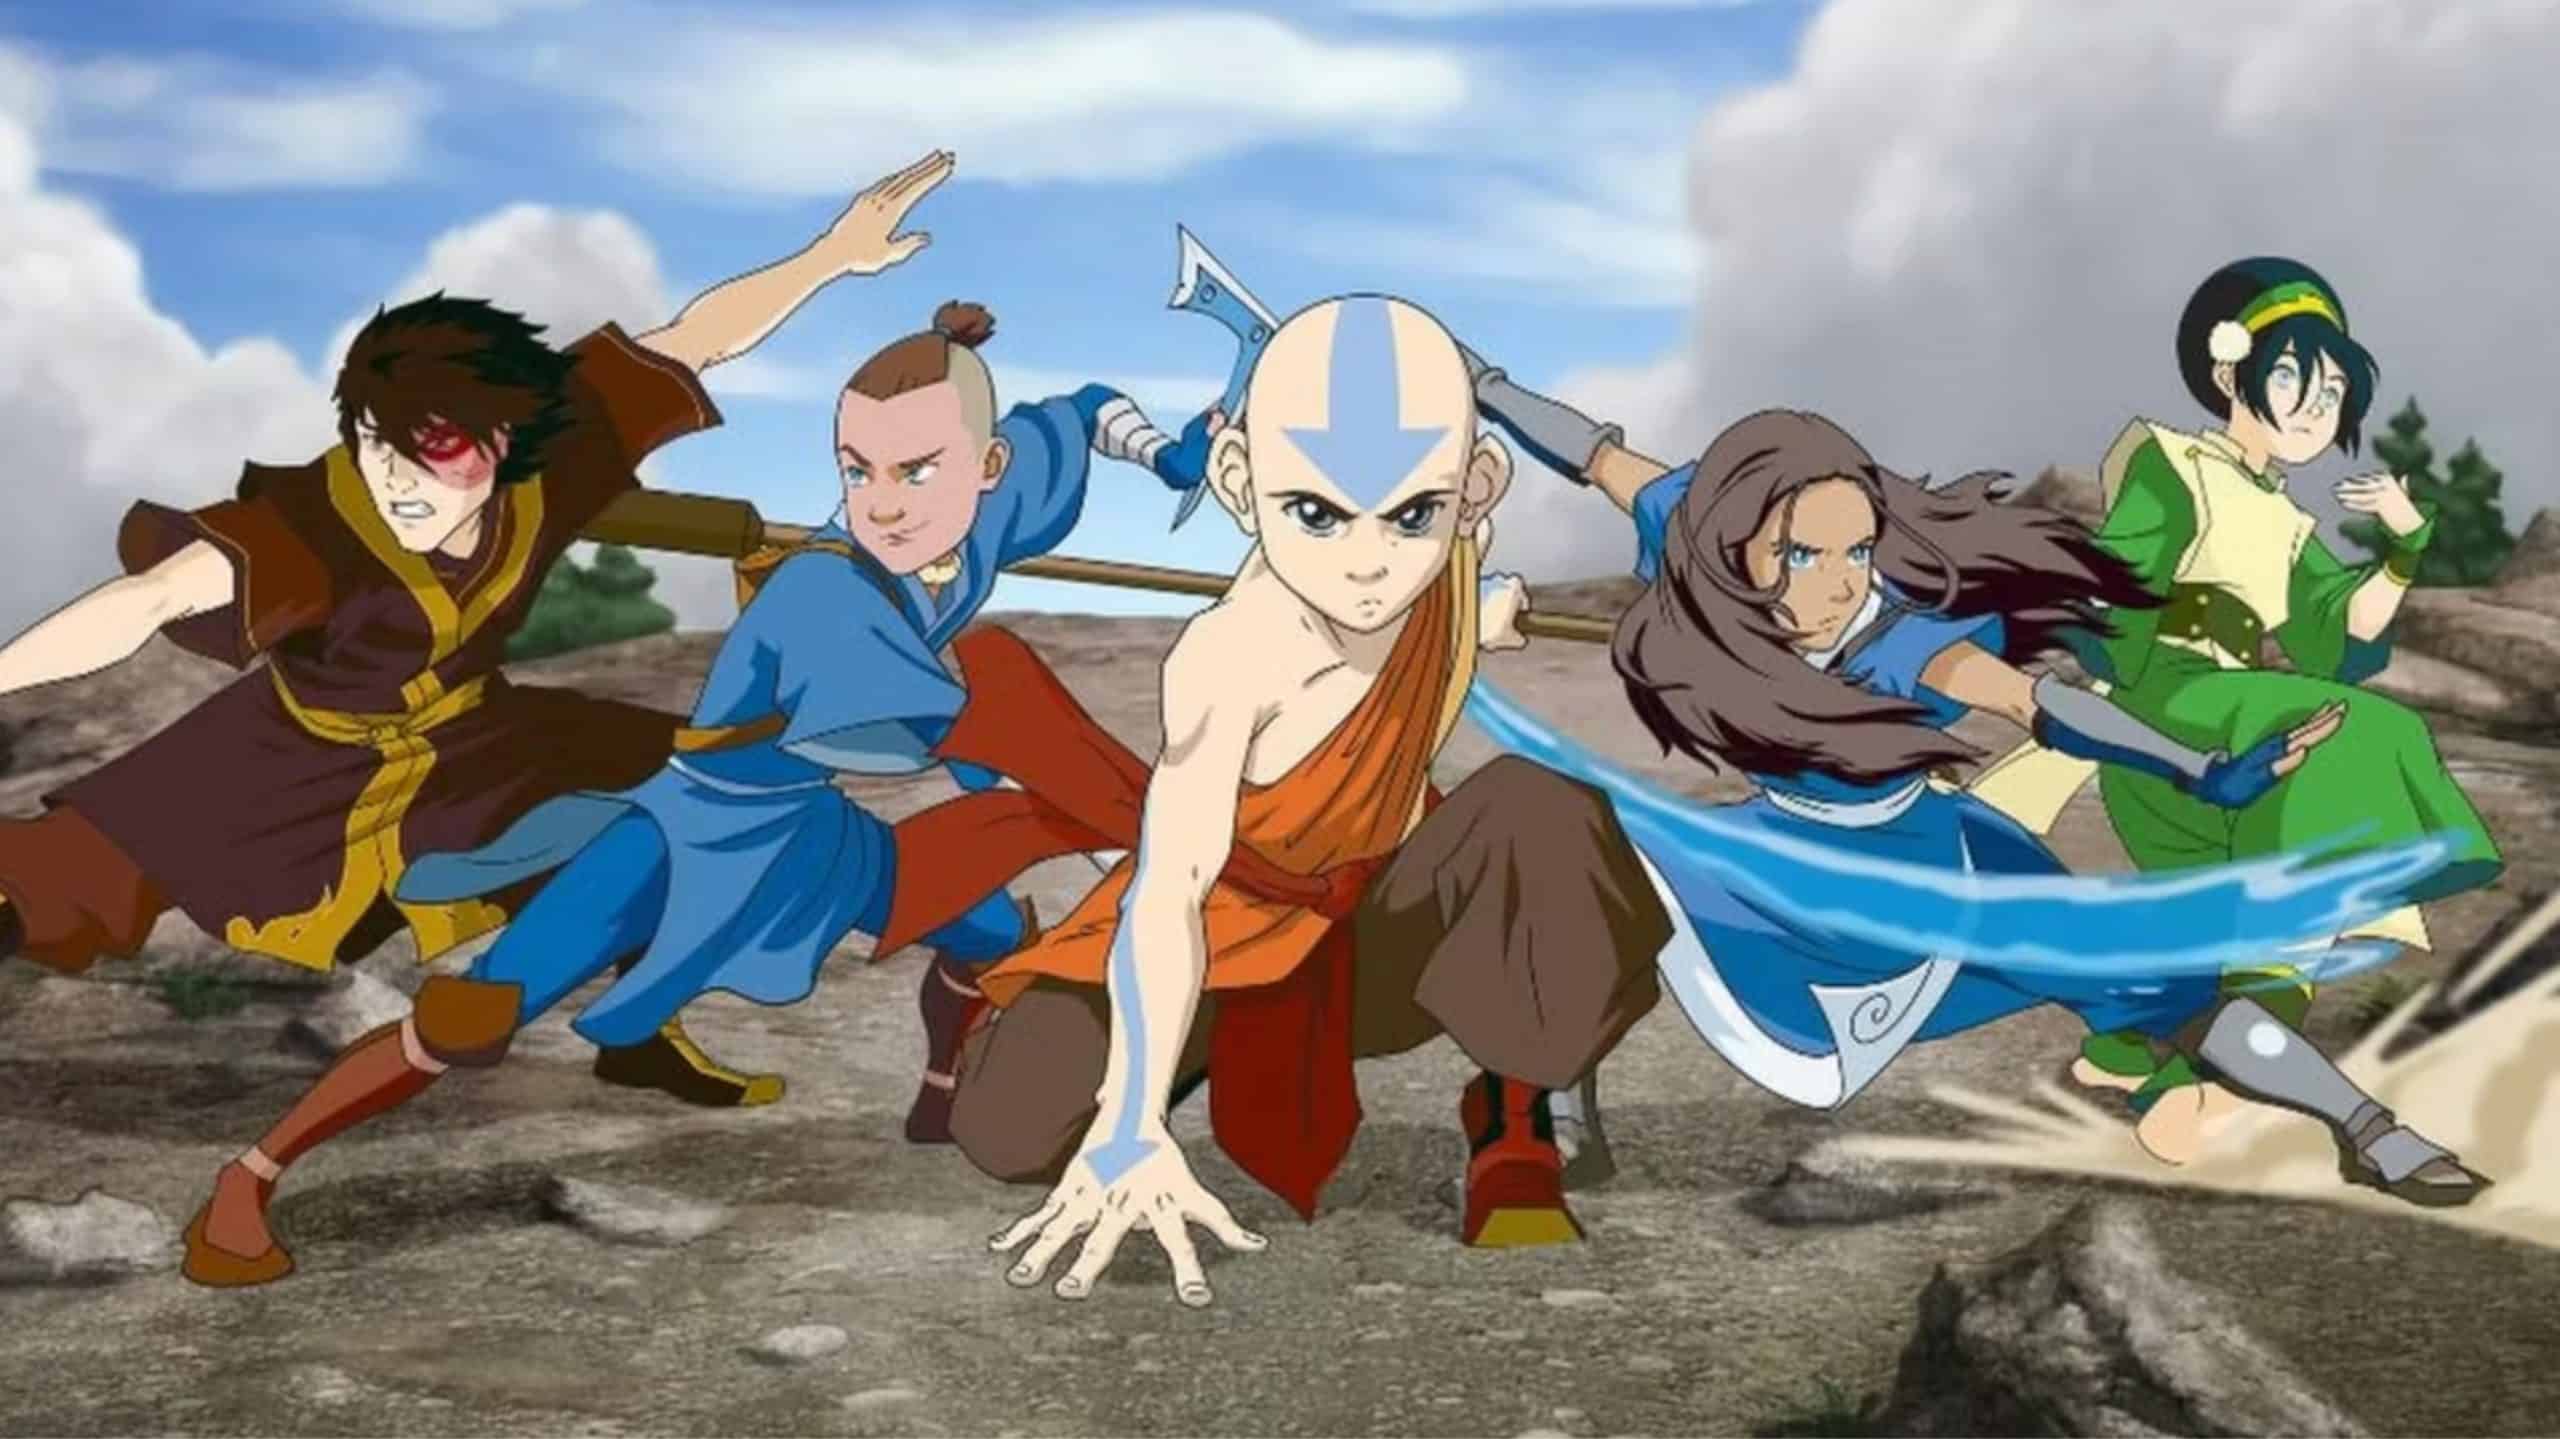 The Last Airbender remake casts King Bumi, cabbage merchant, and more